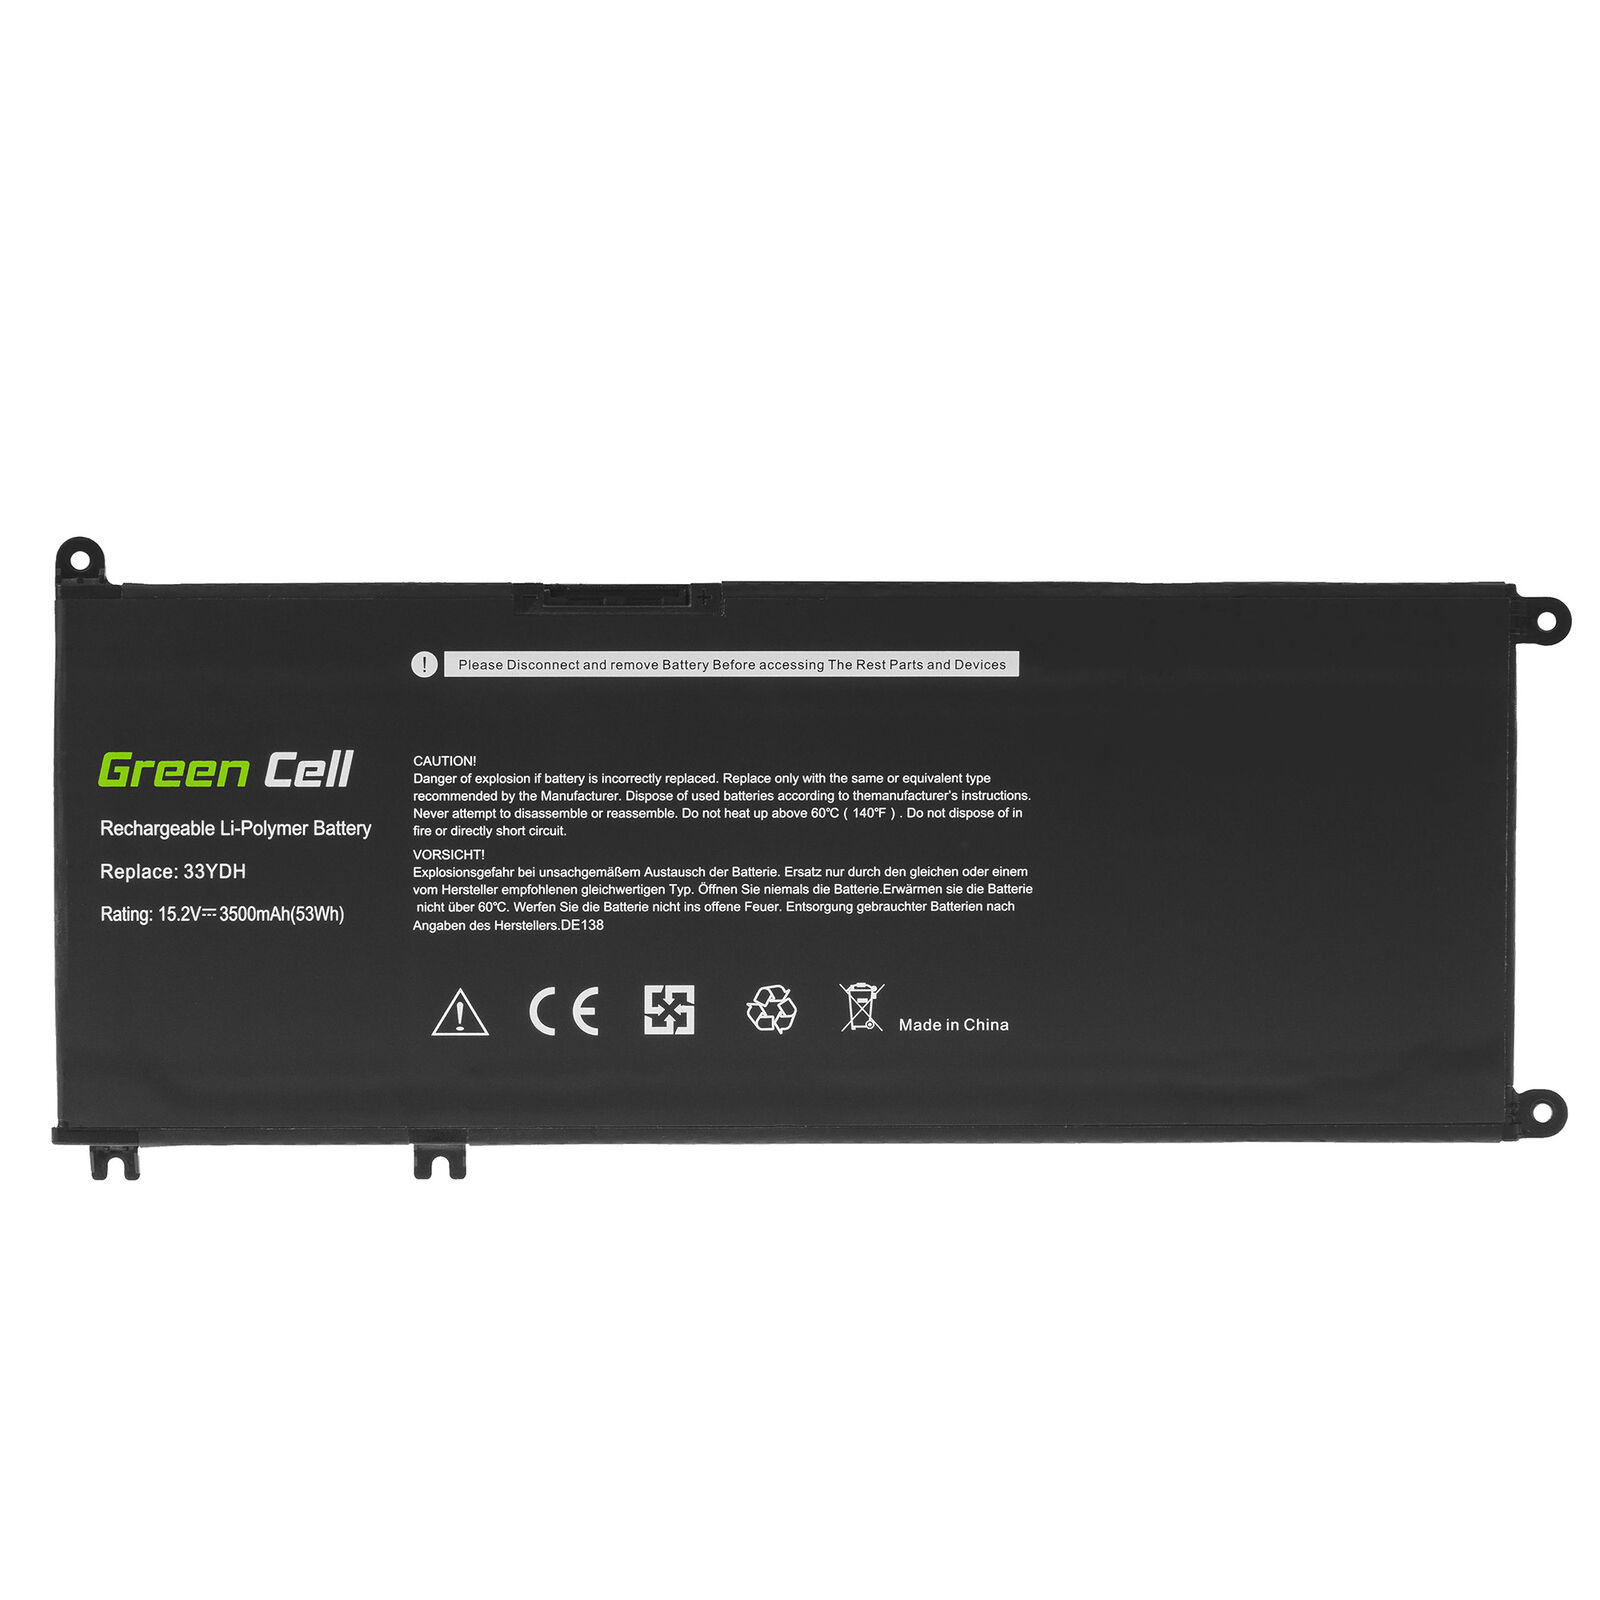 Dell Inspiron 15 7577 Inspiron 13 7353 2in1 G3 15 3579 compatible battery